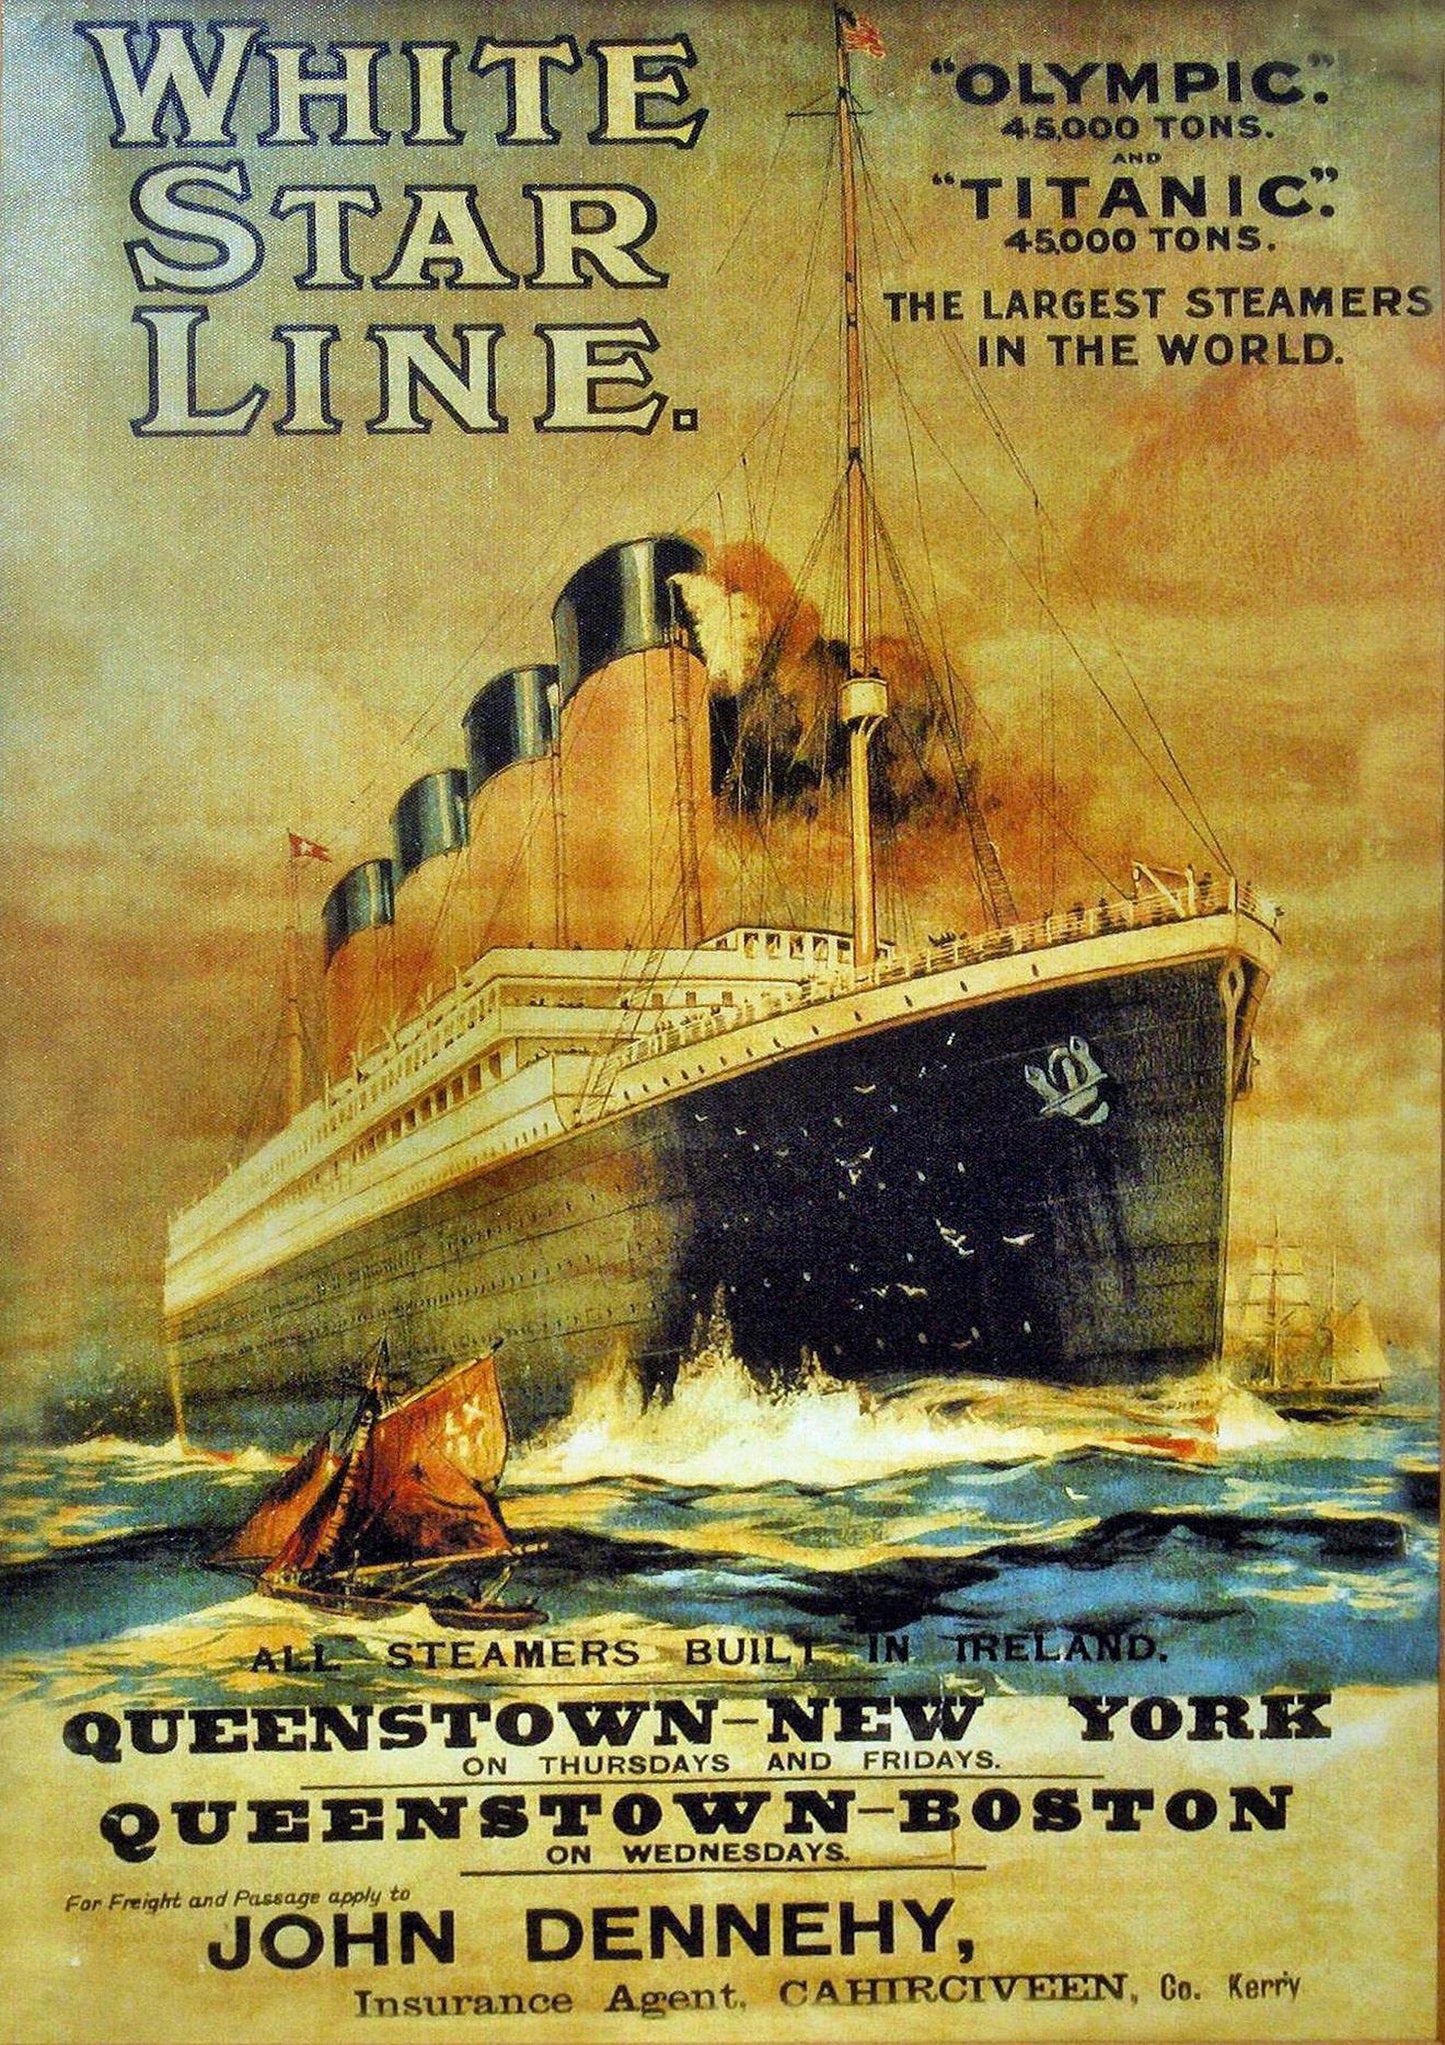 Titanic poster, White Star Line (1)(1910) | Vintage travel posters Posters, Prints, & Visual Artwork The Trumpet Shop   